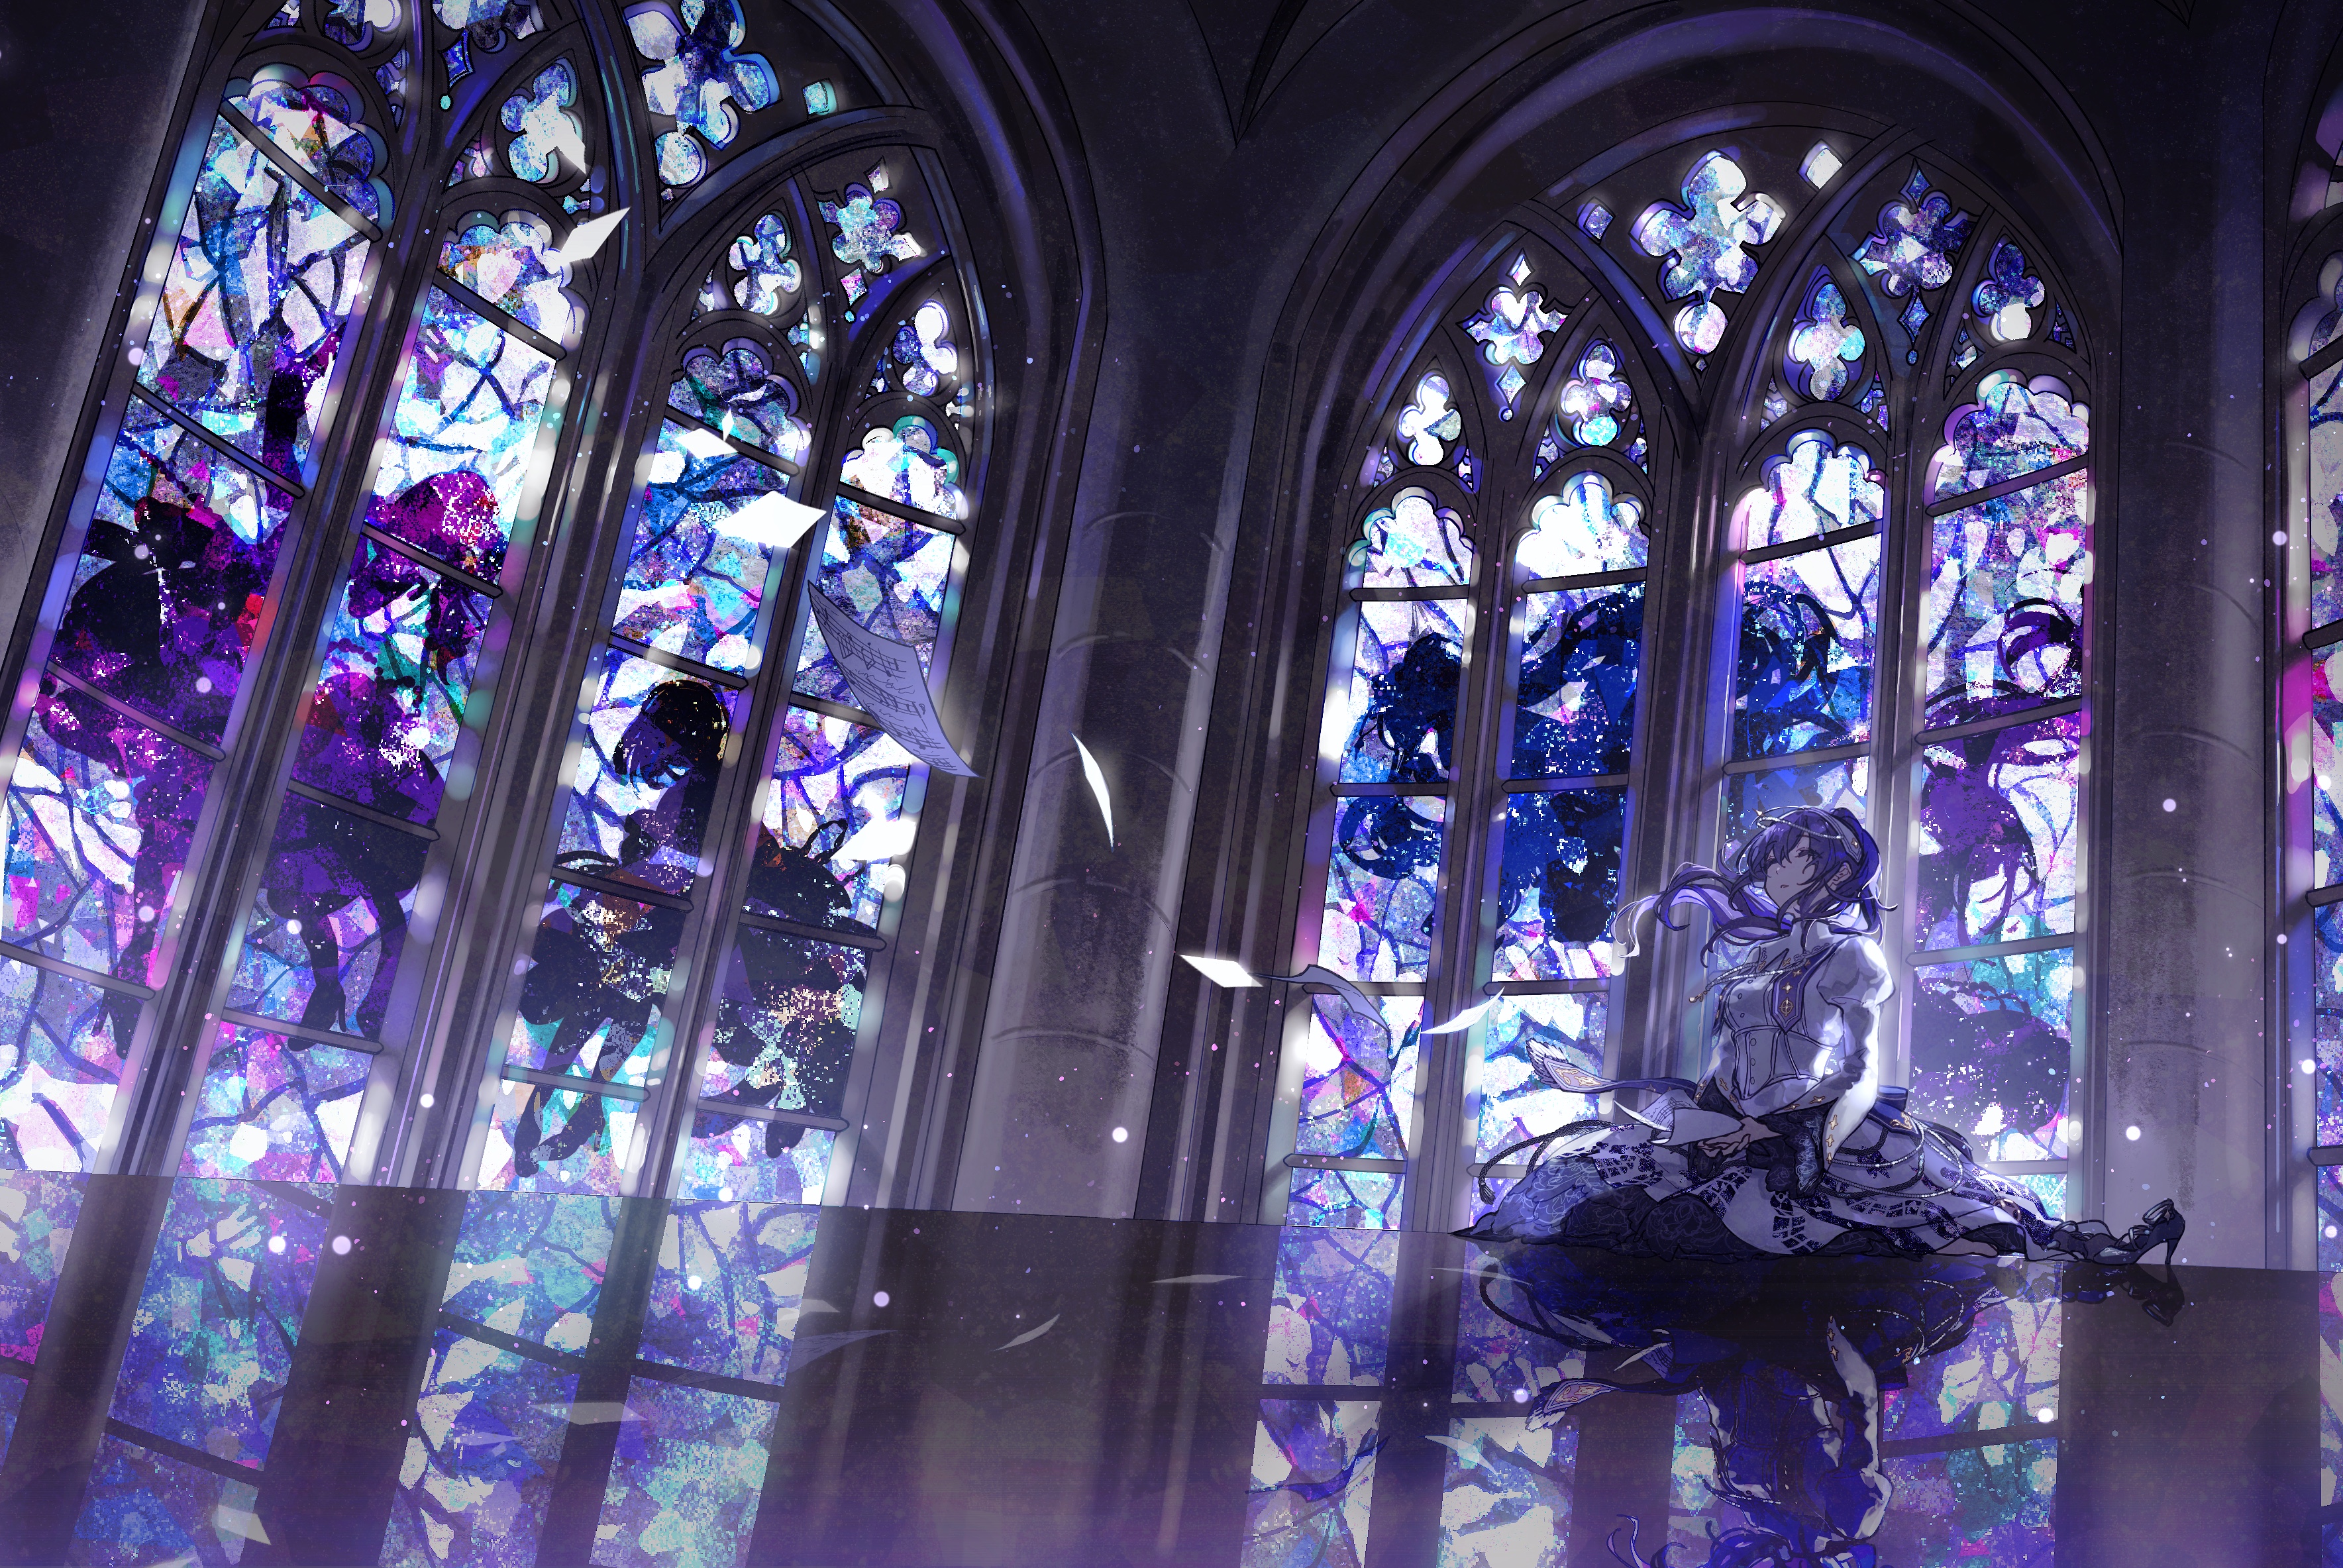 Anime Anime Girls Closed Eyes Long Hair Paper Reflection Stained Glass Interior Dress Musical Notes  3537x2367